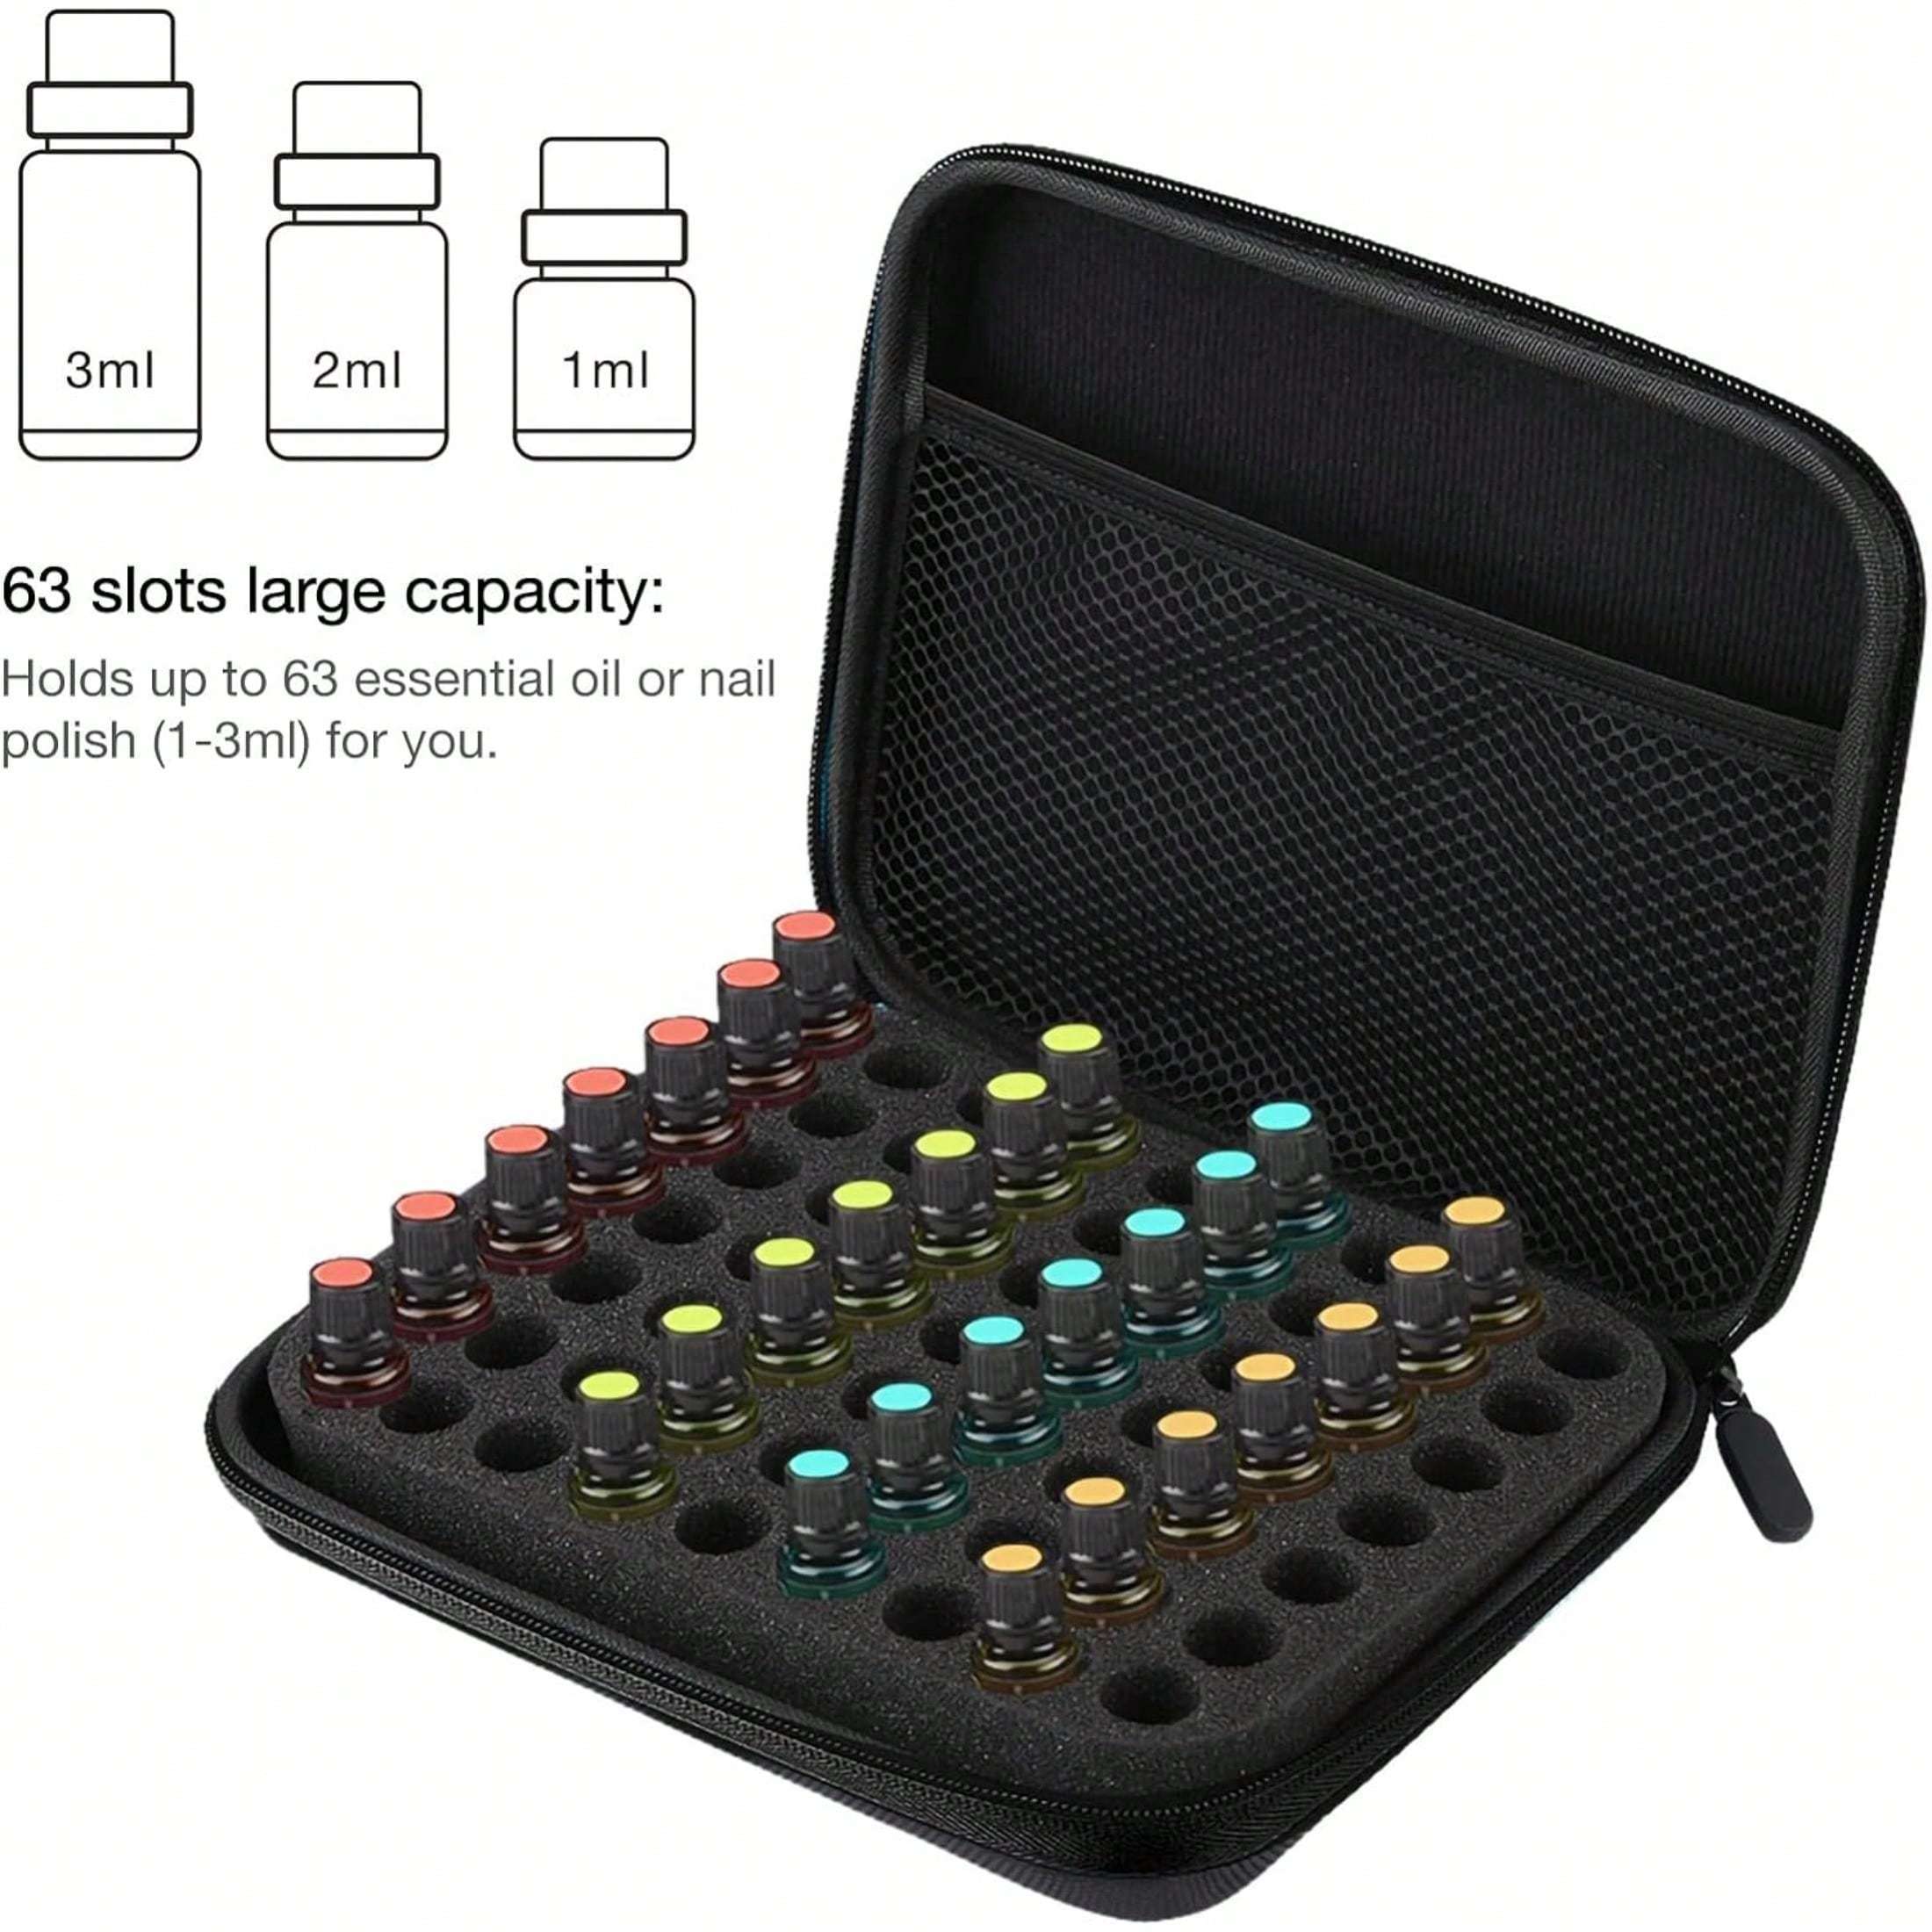 

Essential Oil Carrying Case With Foam Insert, 63-bottle Capacity, Travel Organizer For Aromatherapy Oils, 8.5x6.8x1.9 Inch, Multi-colored Zippers, Storage For Other Oils - Black